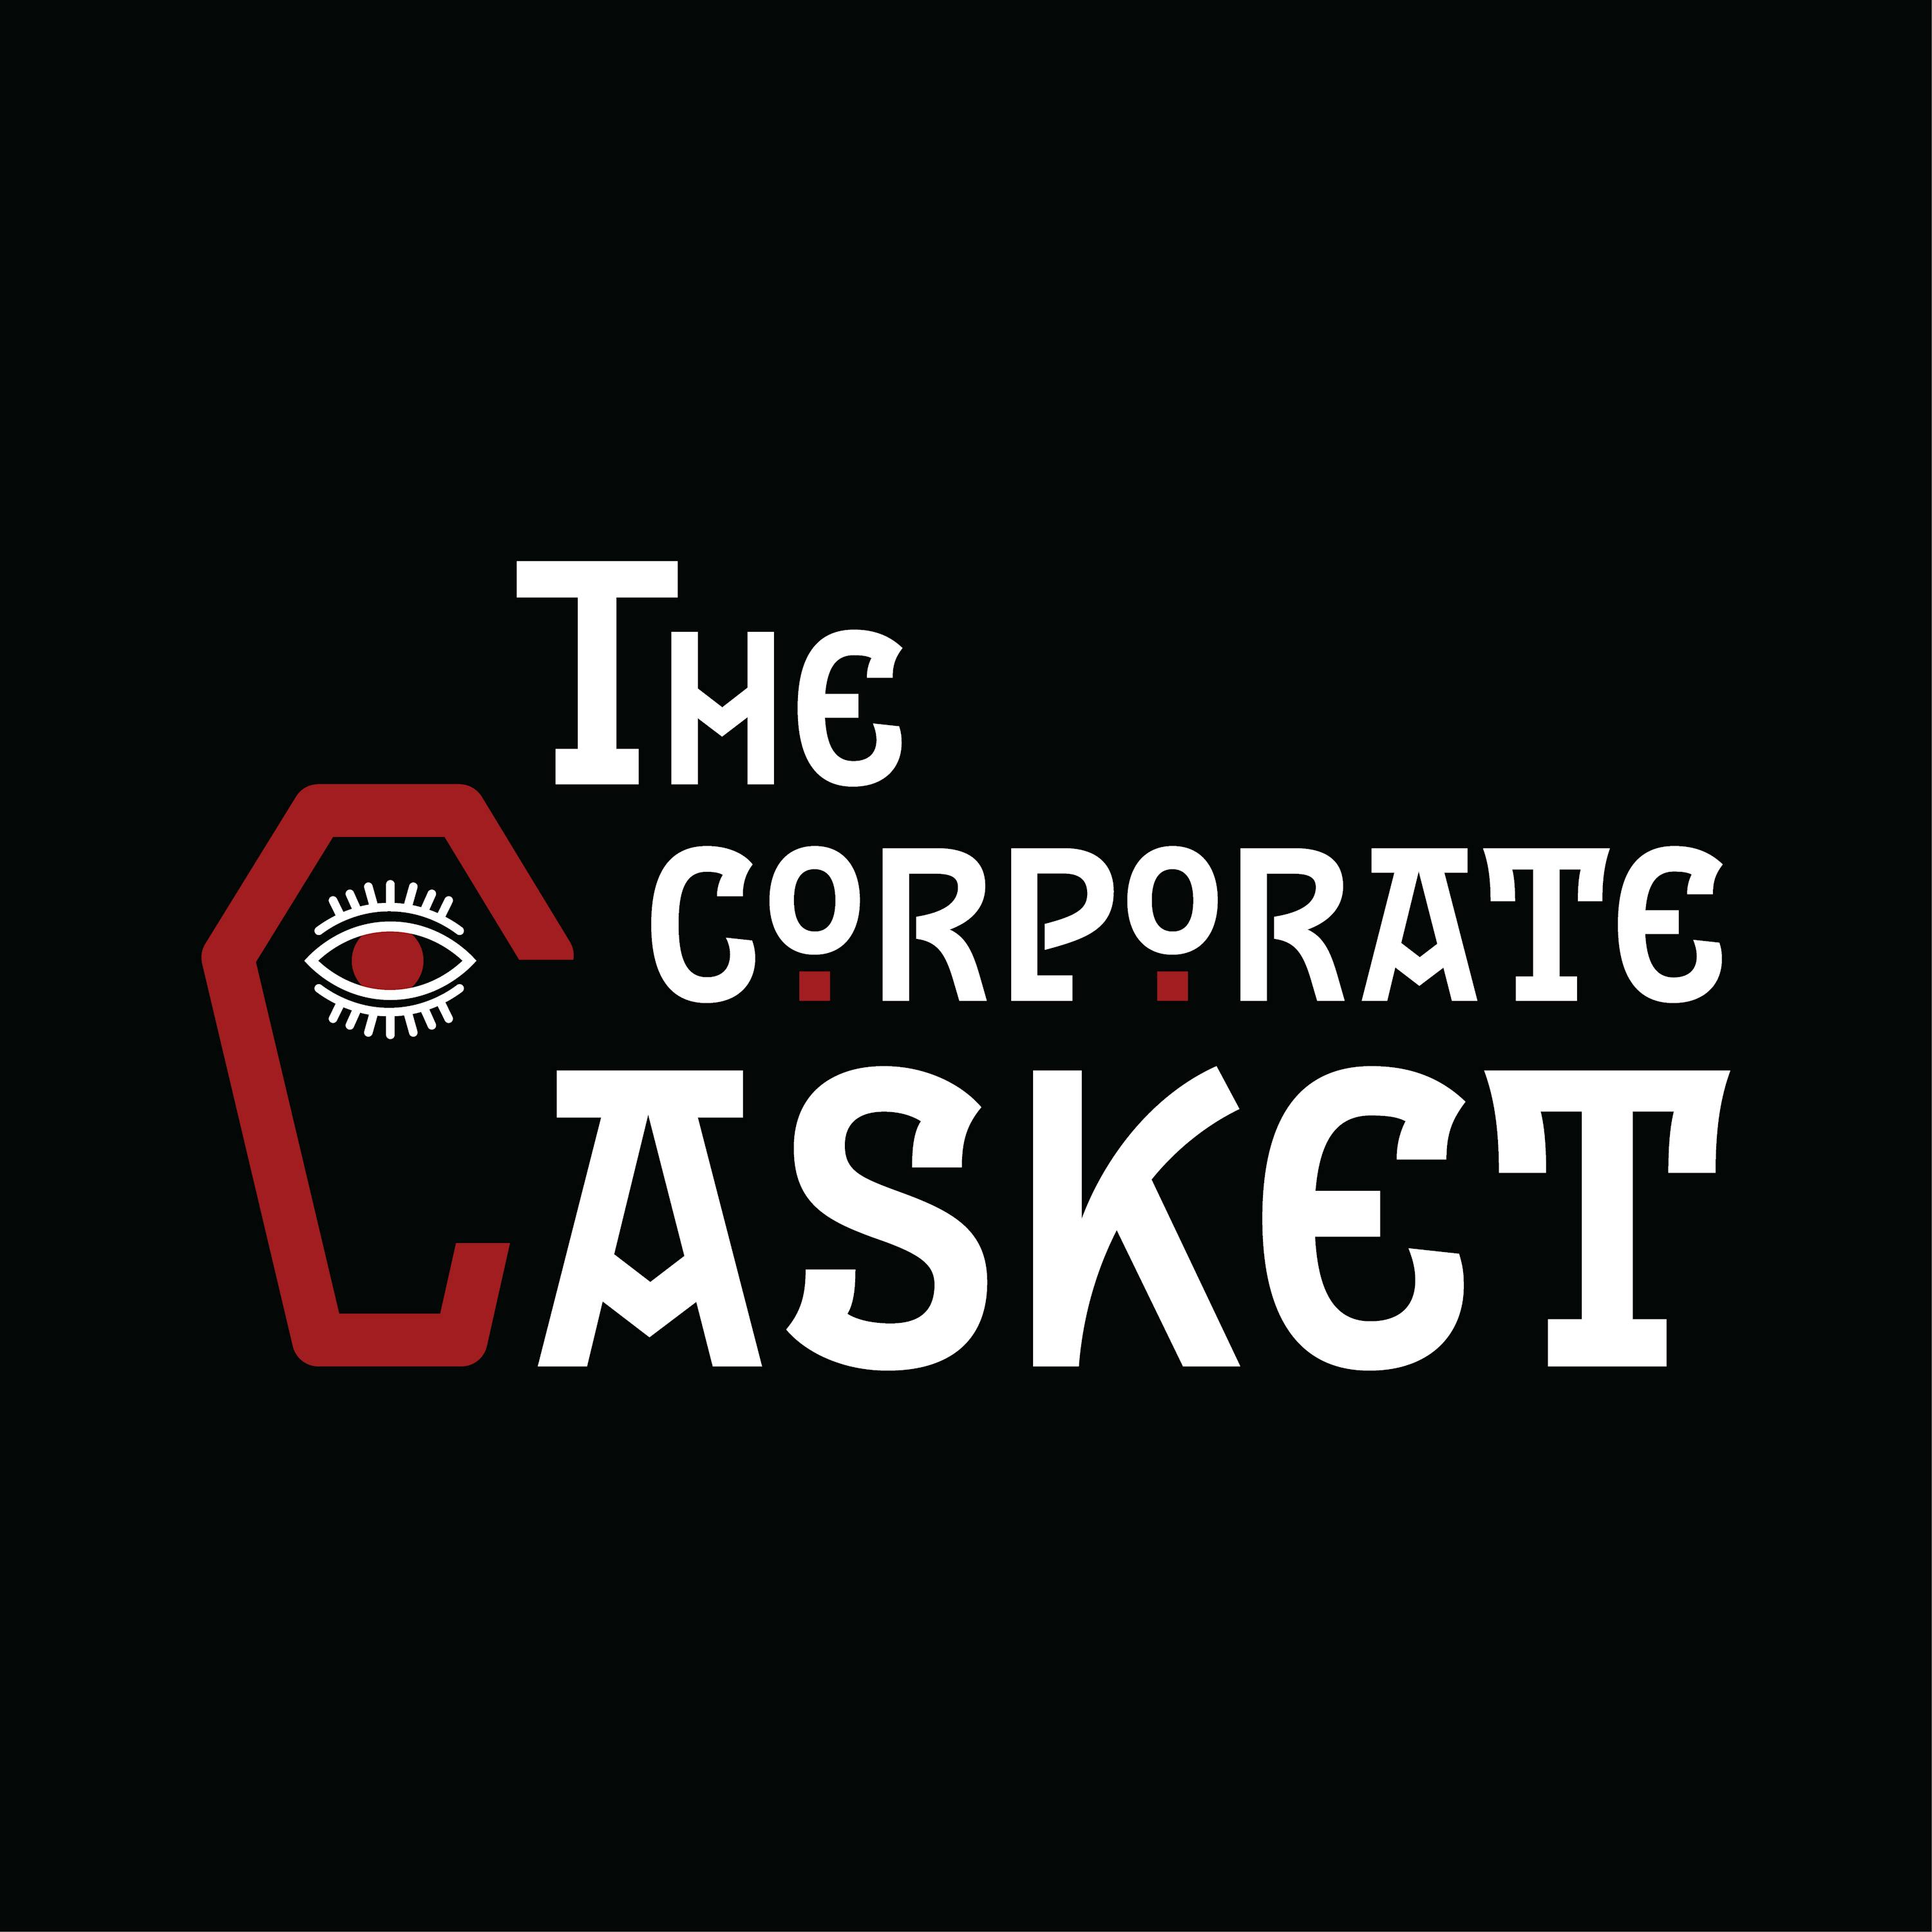 Is Your Makeup Killing You? | Corporate Casket